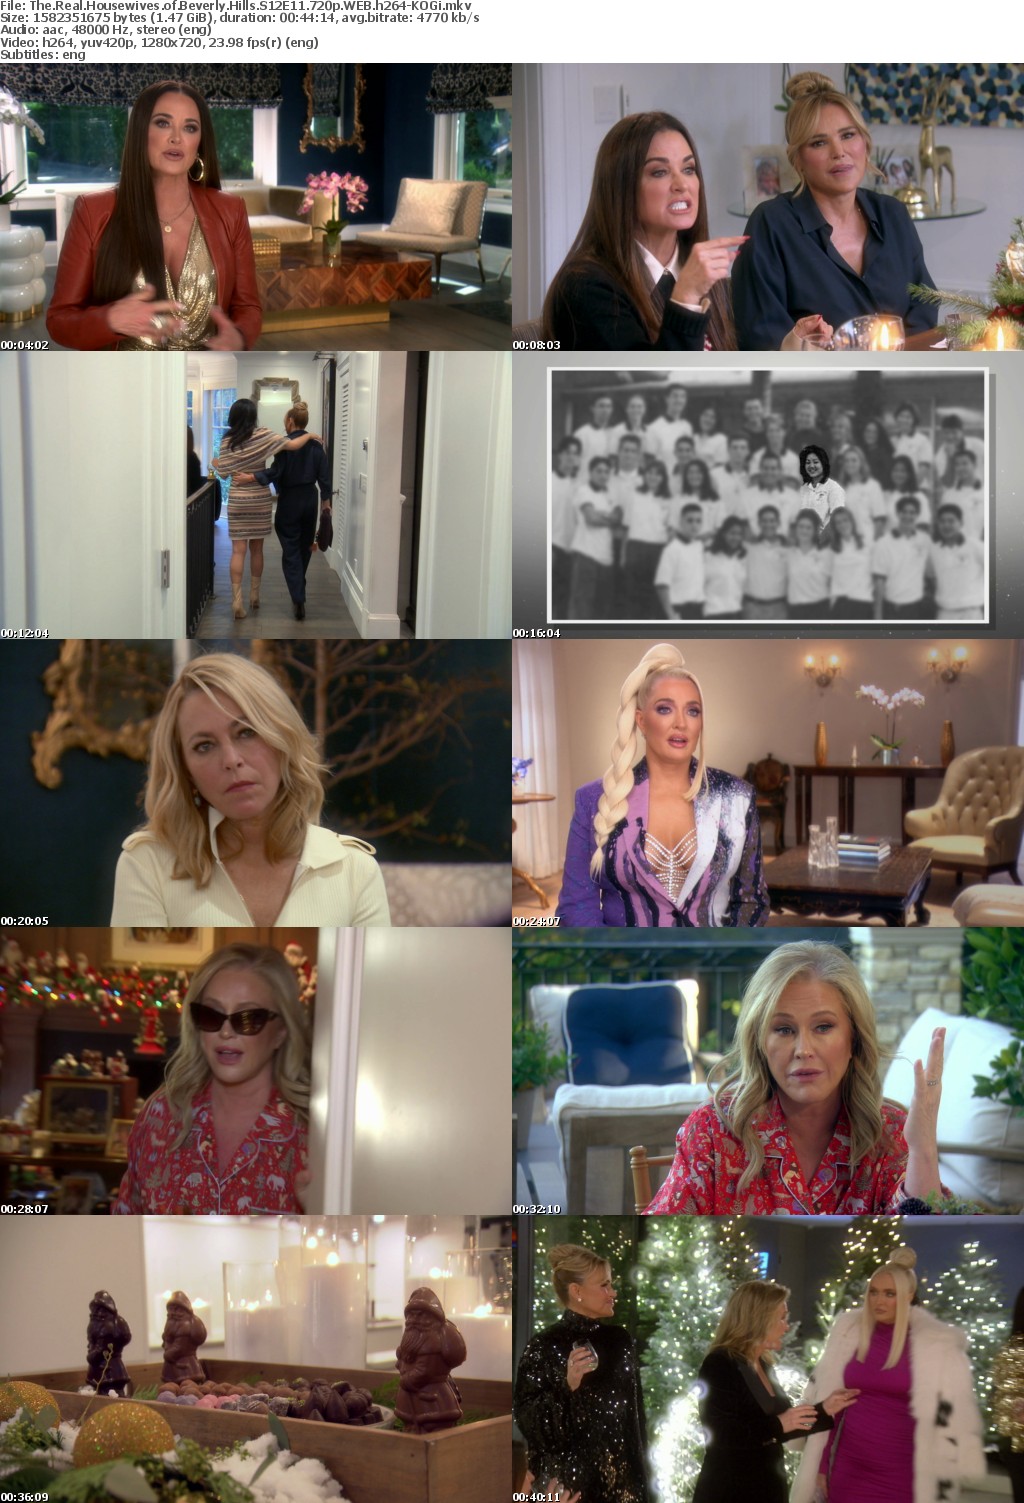 The Real Housewives of Beverly Hills S12E11 720p WEB h264-KOGi